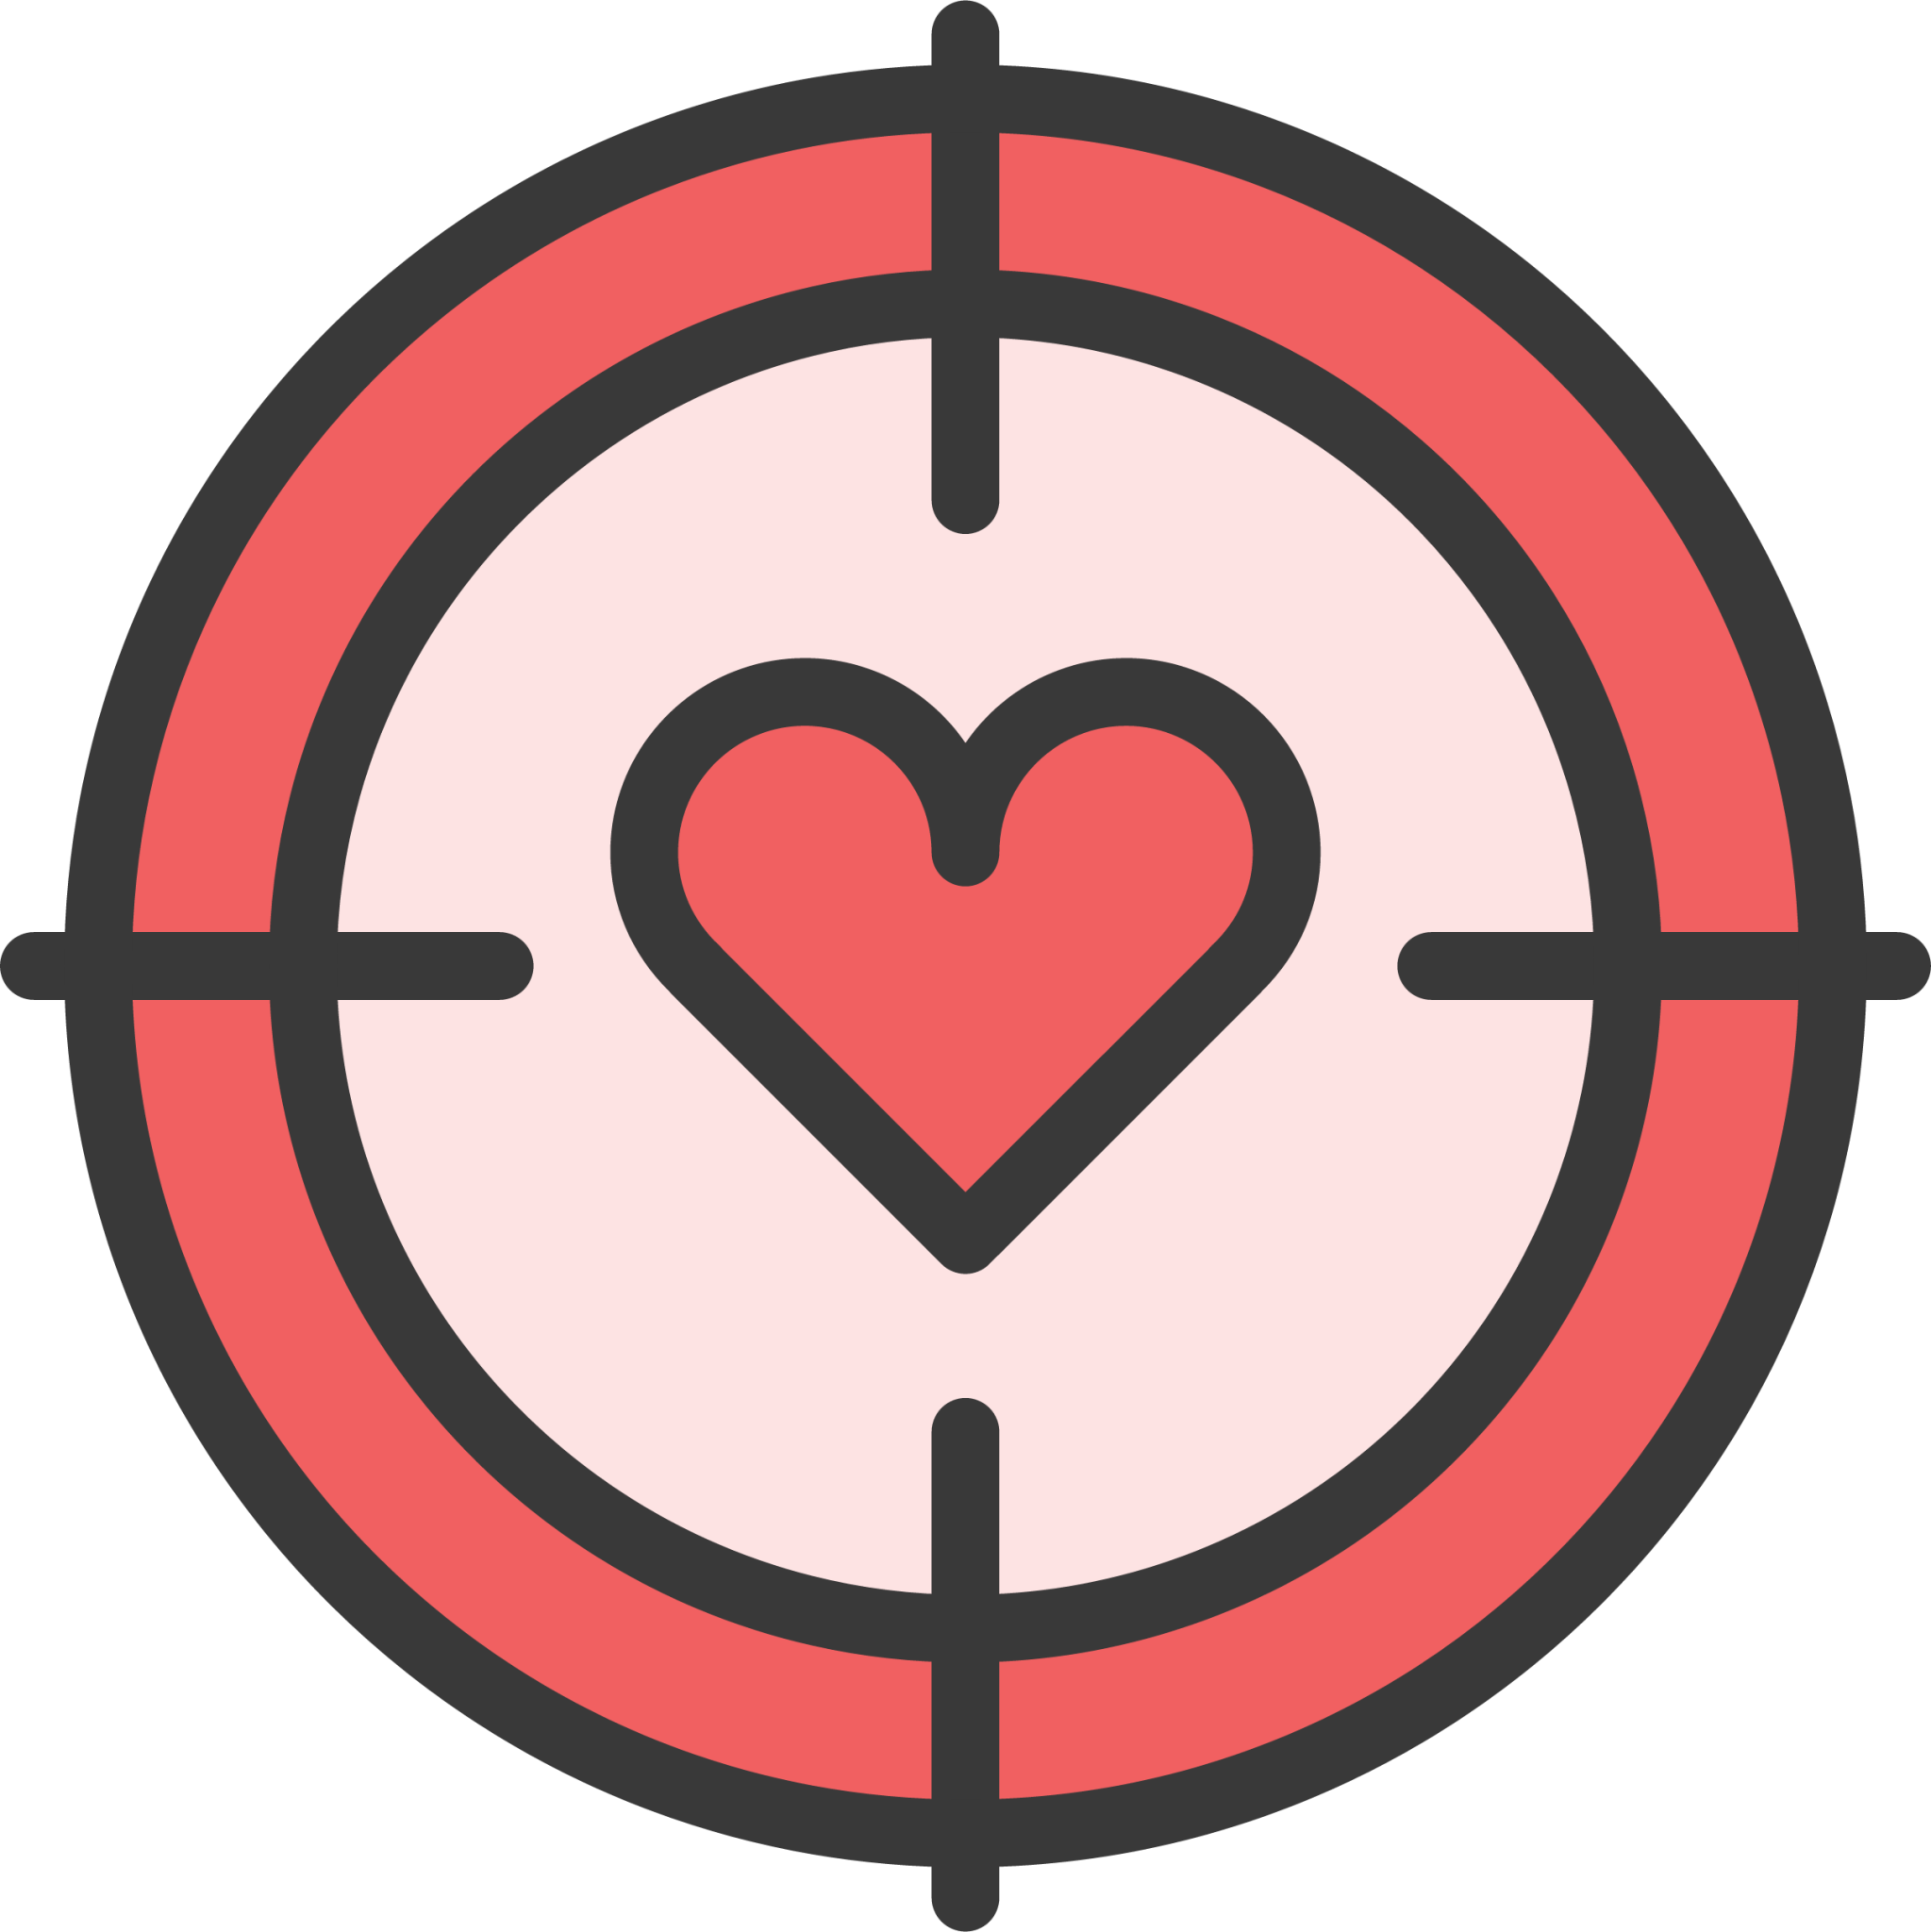 heart target icon